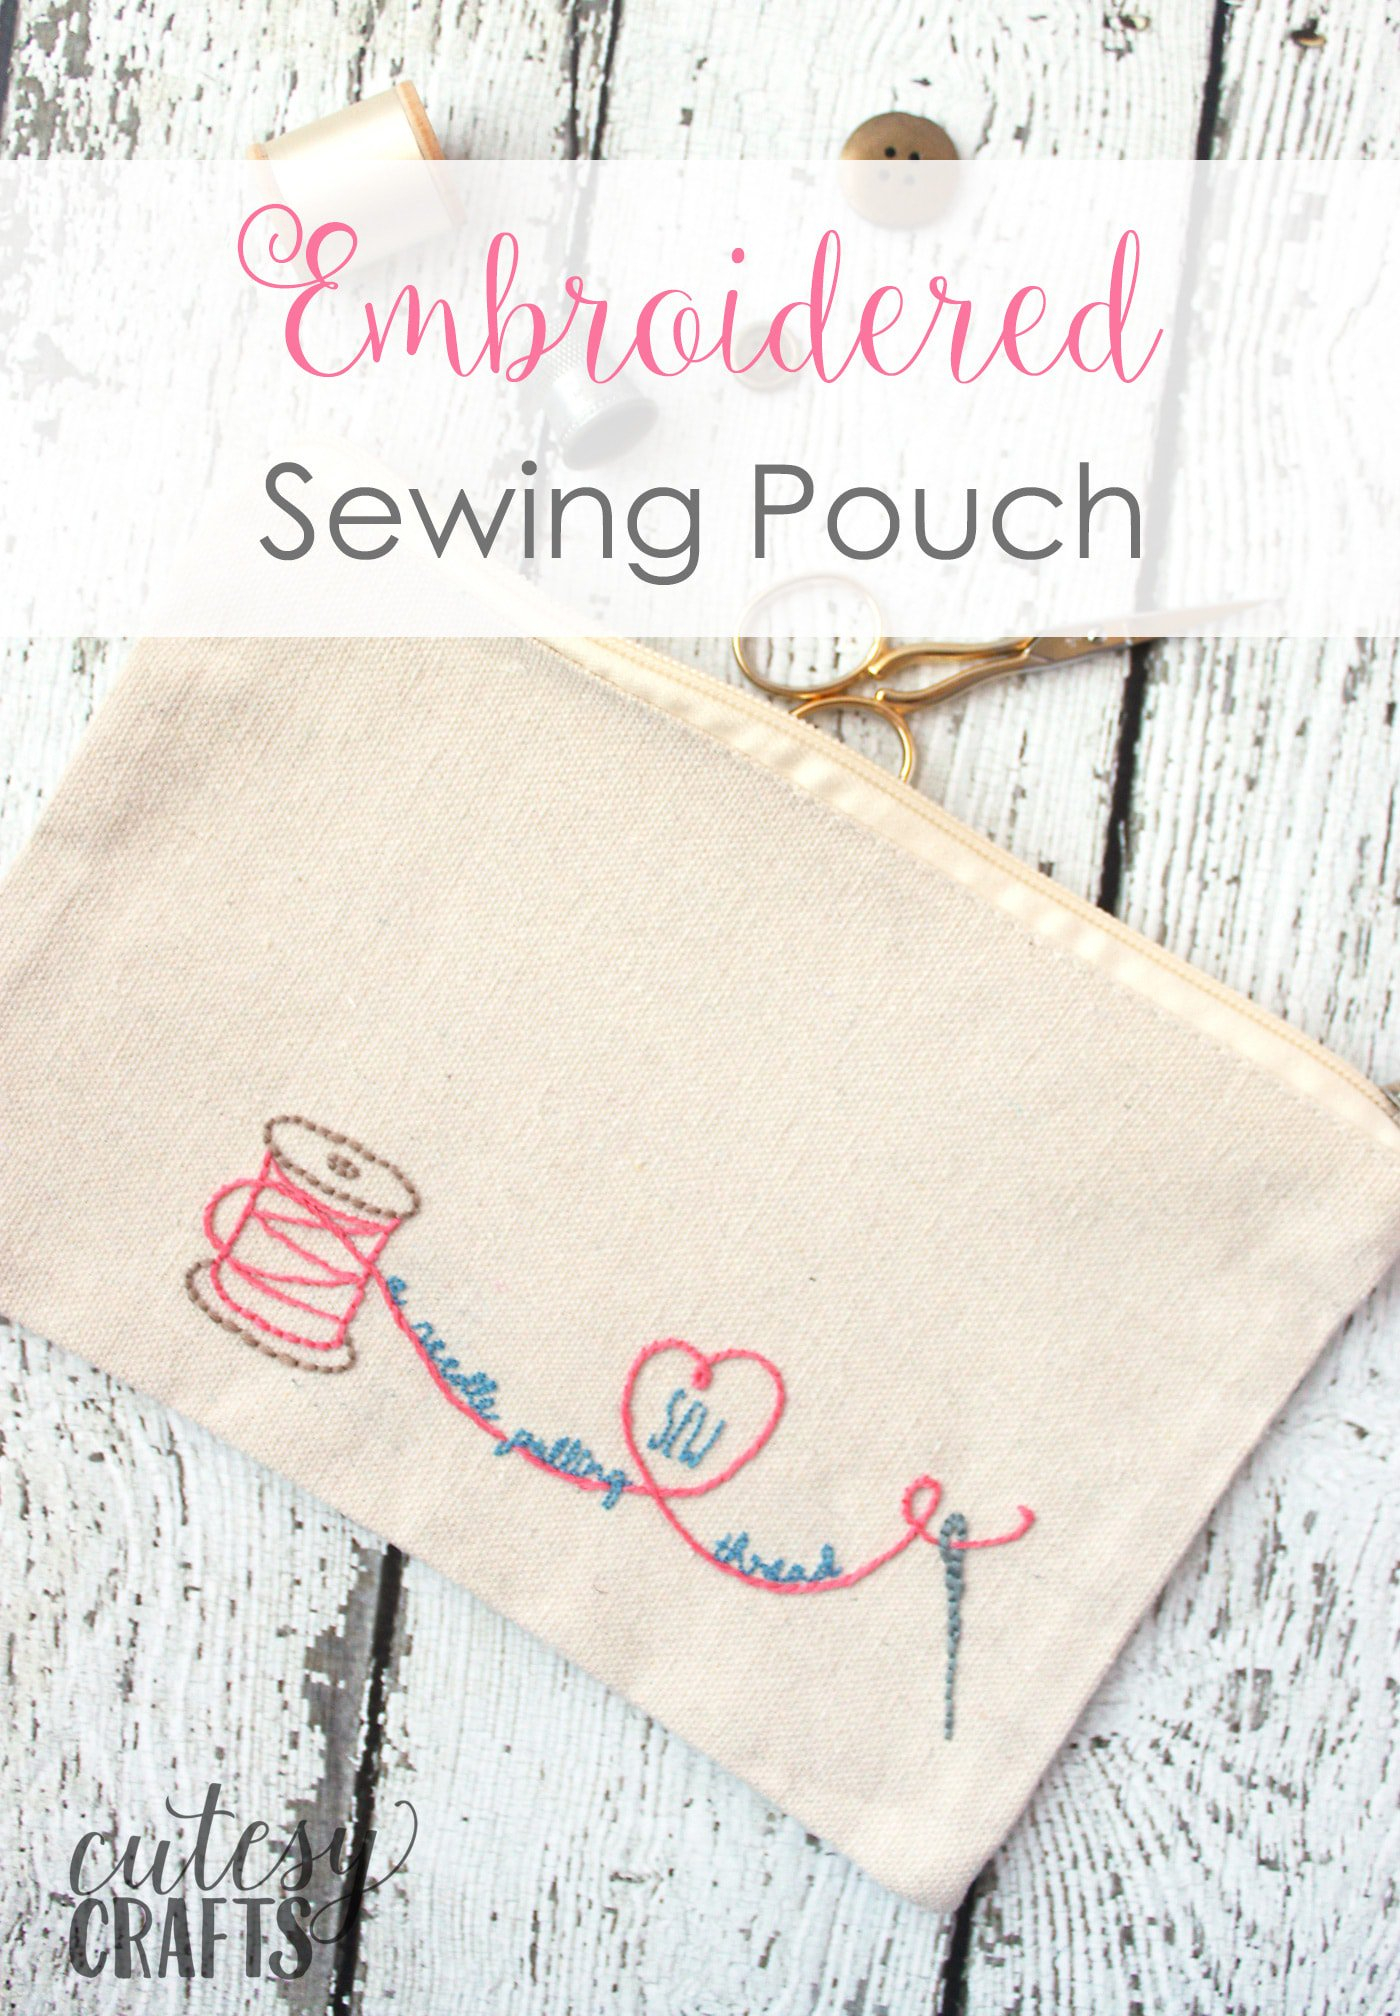 Free Embroidery Designs Patterns Adorable Diy Sew A Needle Pulling Thread Bag Free Hand